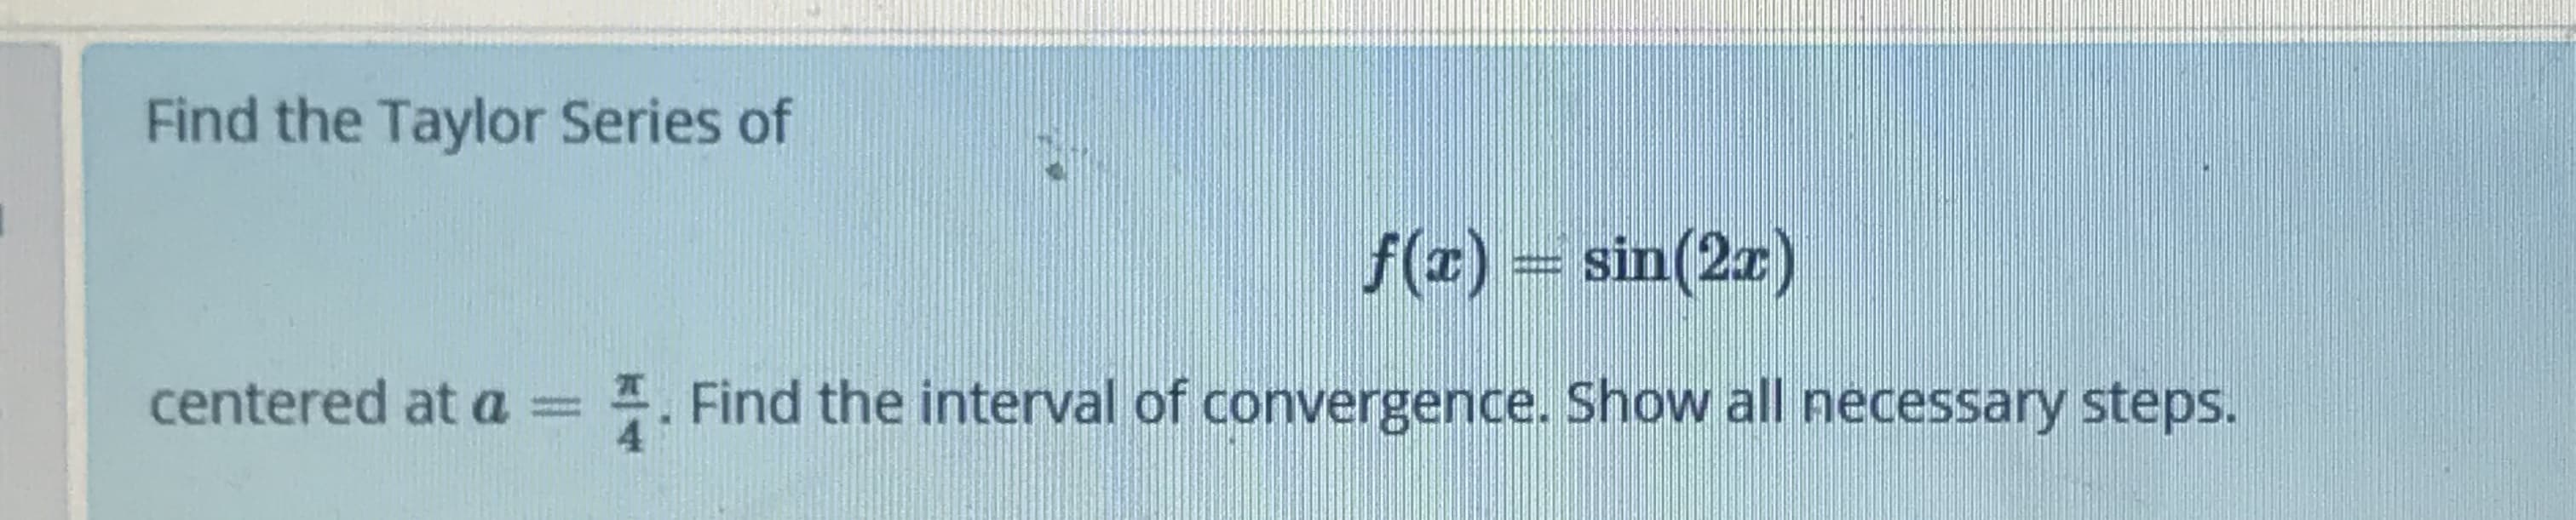 Find the Taylor Series of
f(z) = sin(2r)
centered at a =
1. Find the interval of convergence. Show all necessary steps.
